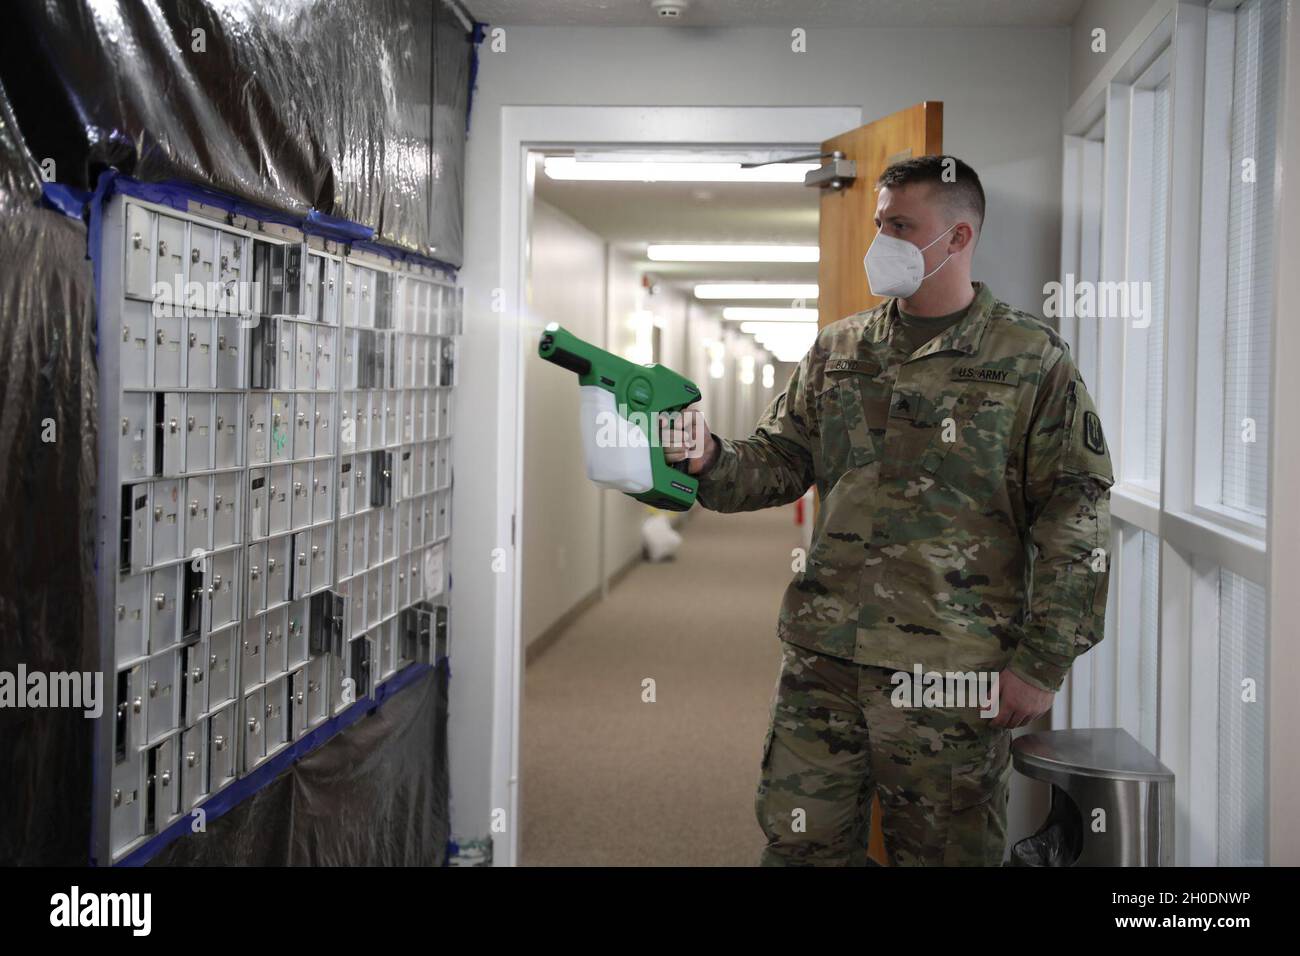 Spc. Quinton Boyd, a member assigned to a Facility Assistance Support Team, Kentucky National Guard, sanitizes mailboxes with an electrostatic sprayer while at Sayre Christian Village, Lexington, Ky., 3 Feb. Kentucky Gov. Andy Beshear directed troops to supplement long term healthcare facilities in COVID 19 hot spots throughout Kentucky. Stock Photo